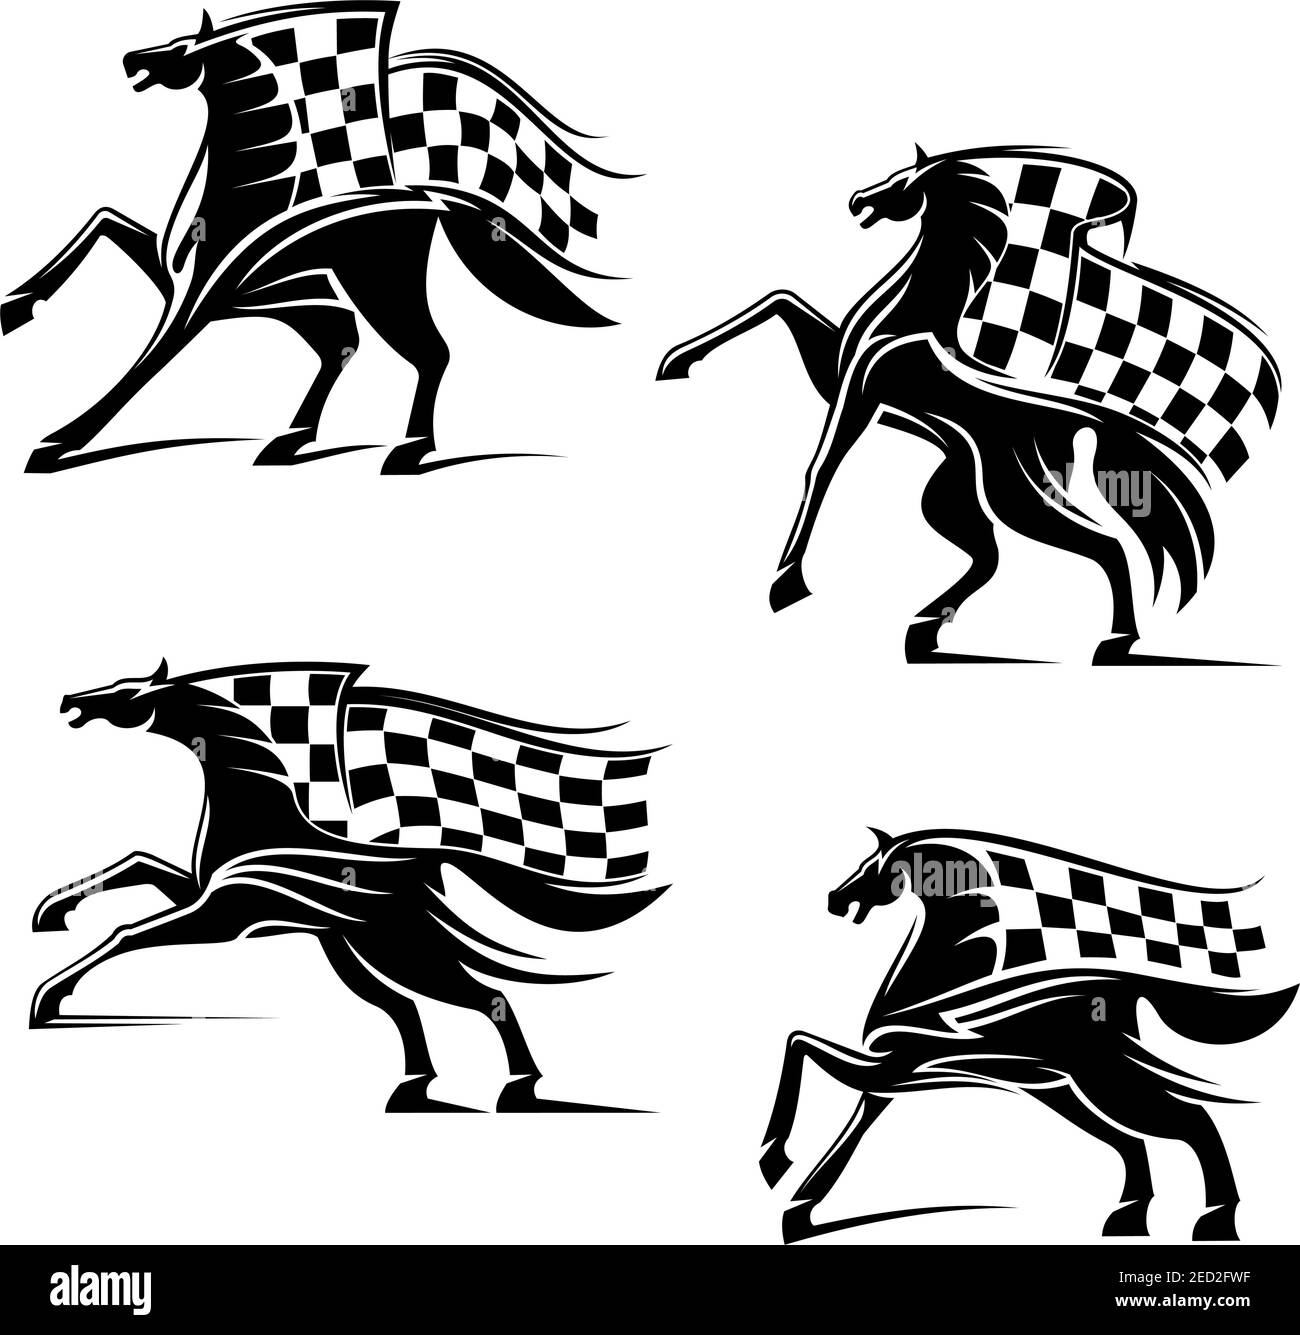 Racing sport emblems. Horses with checkered flags running, stomping, rearing, rushing. Horse or car races vector icons for sport club, bookmaker signb Stock Vector